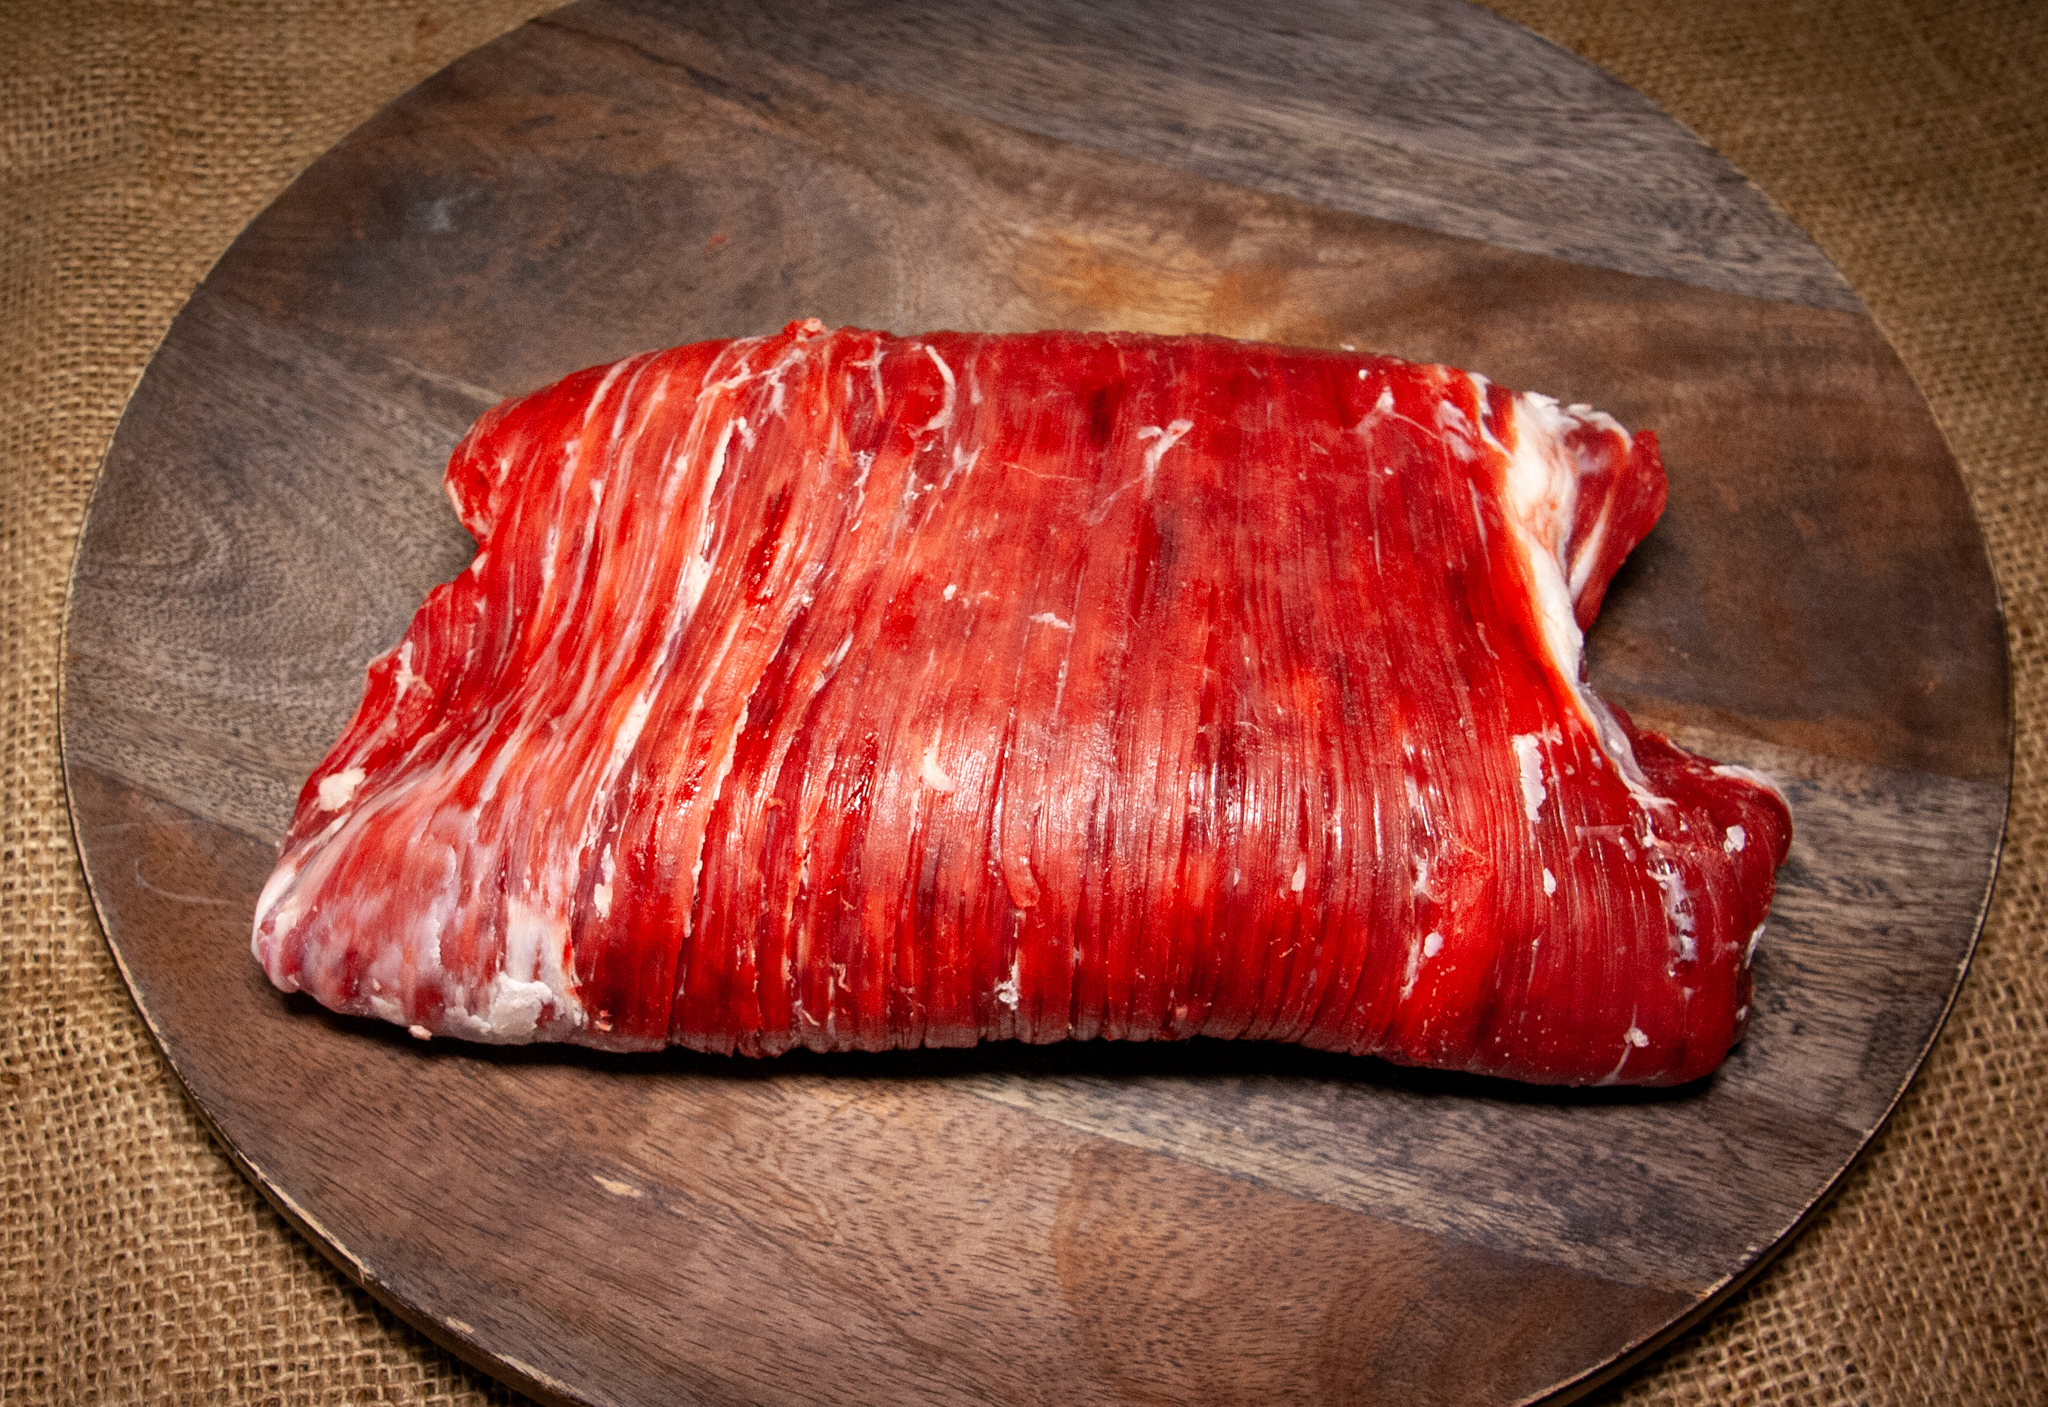 Ebert Grown USDA graded Flank Steak available at Salmon's Meat Products and online for shipping